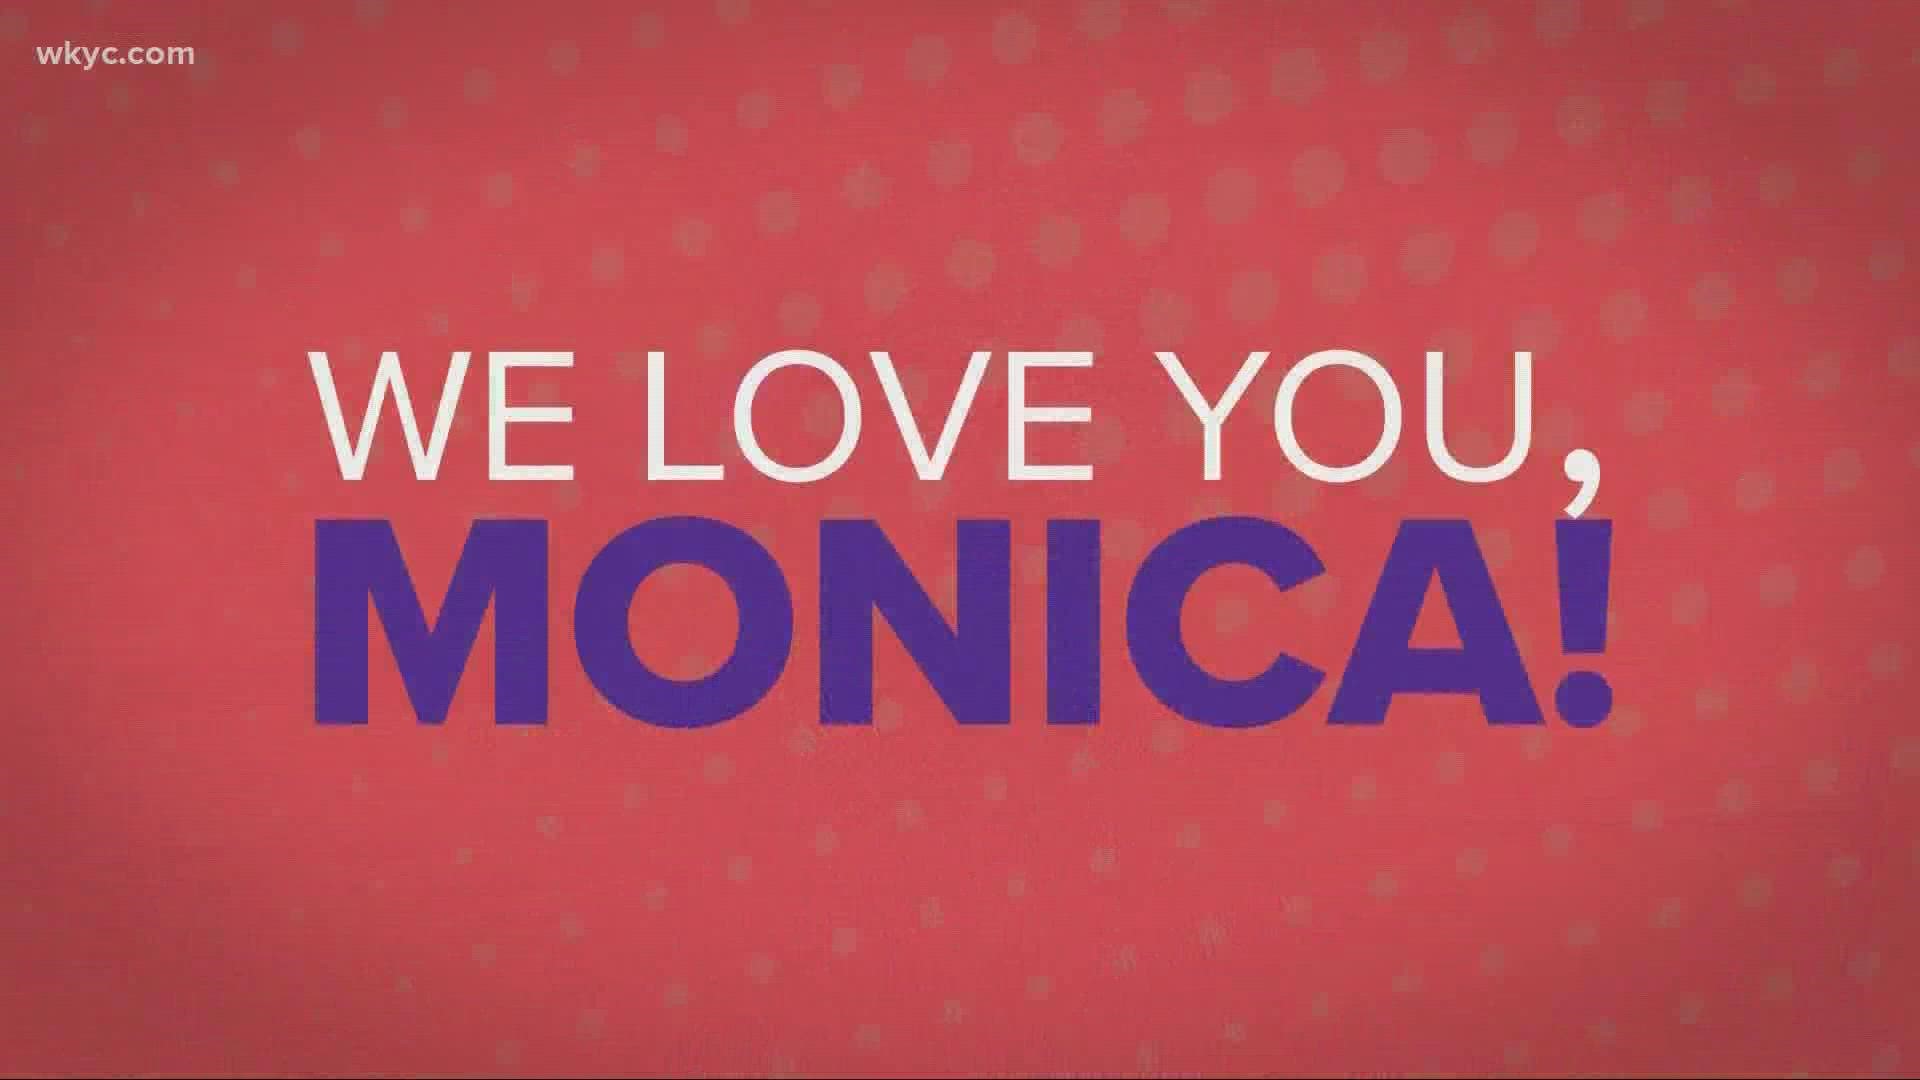 Monica's coworkers sent her well wishes as she prepares to go in for surgery on a brain tumor.